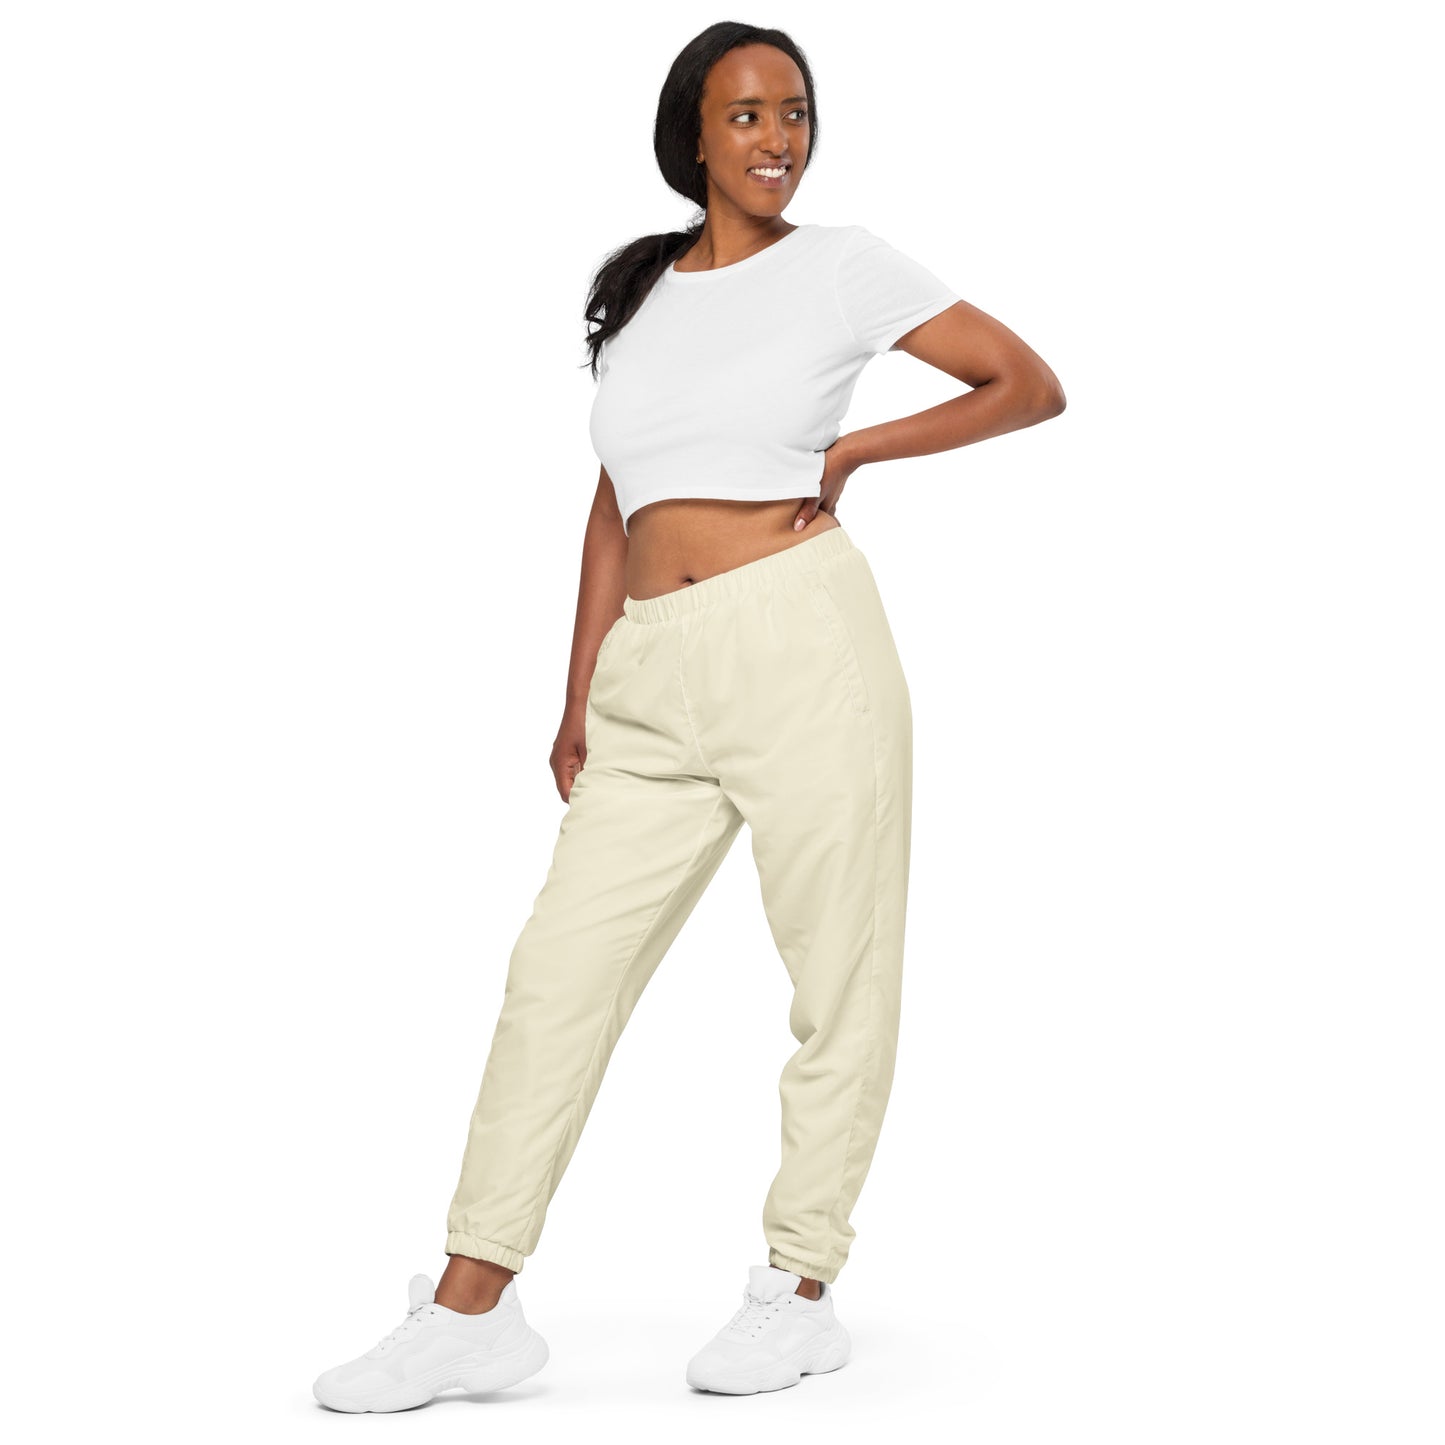 Humble Sportswear, women's relaxed fit lightweight track pants